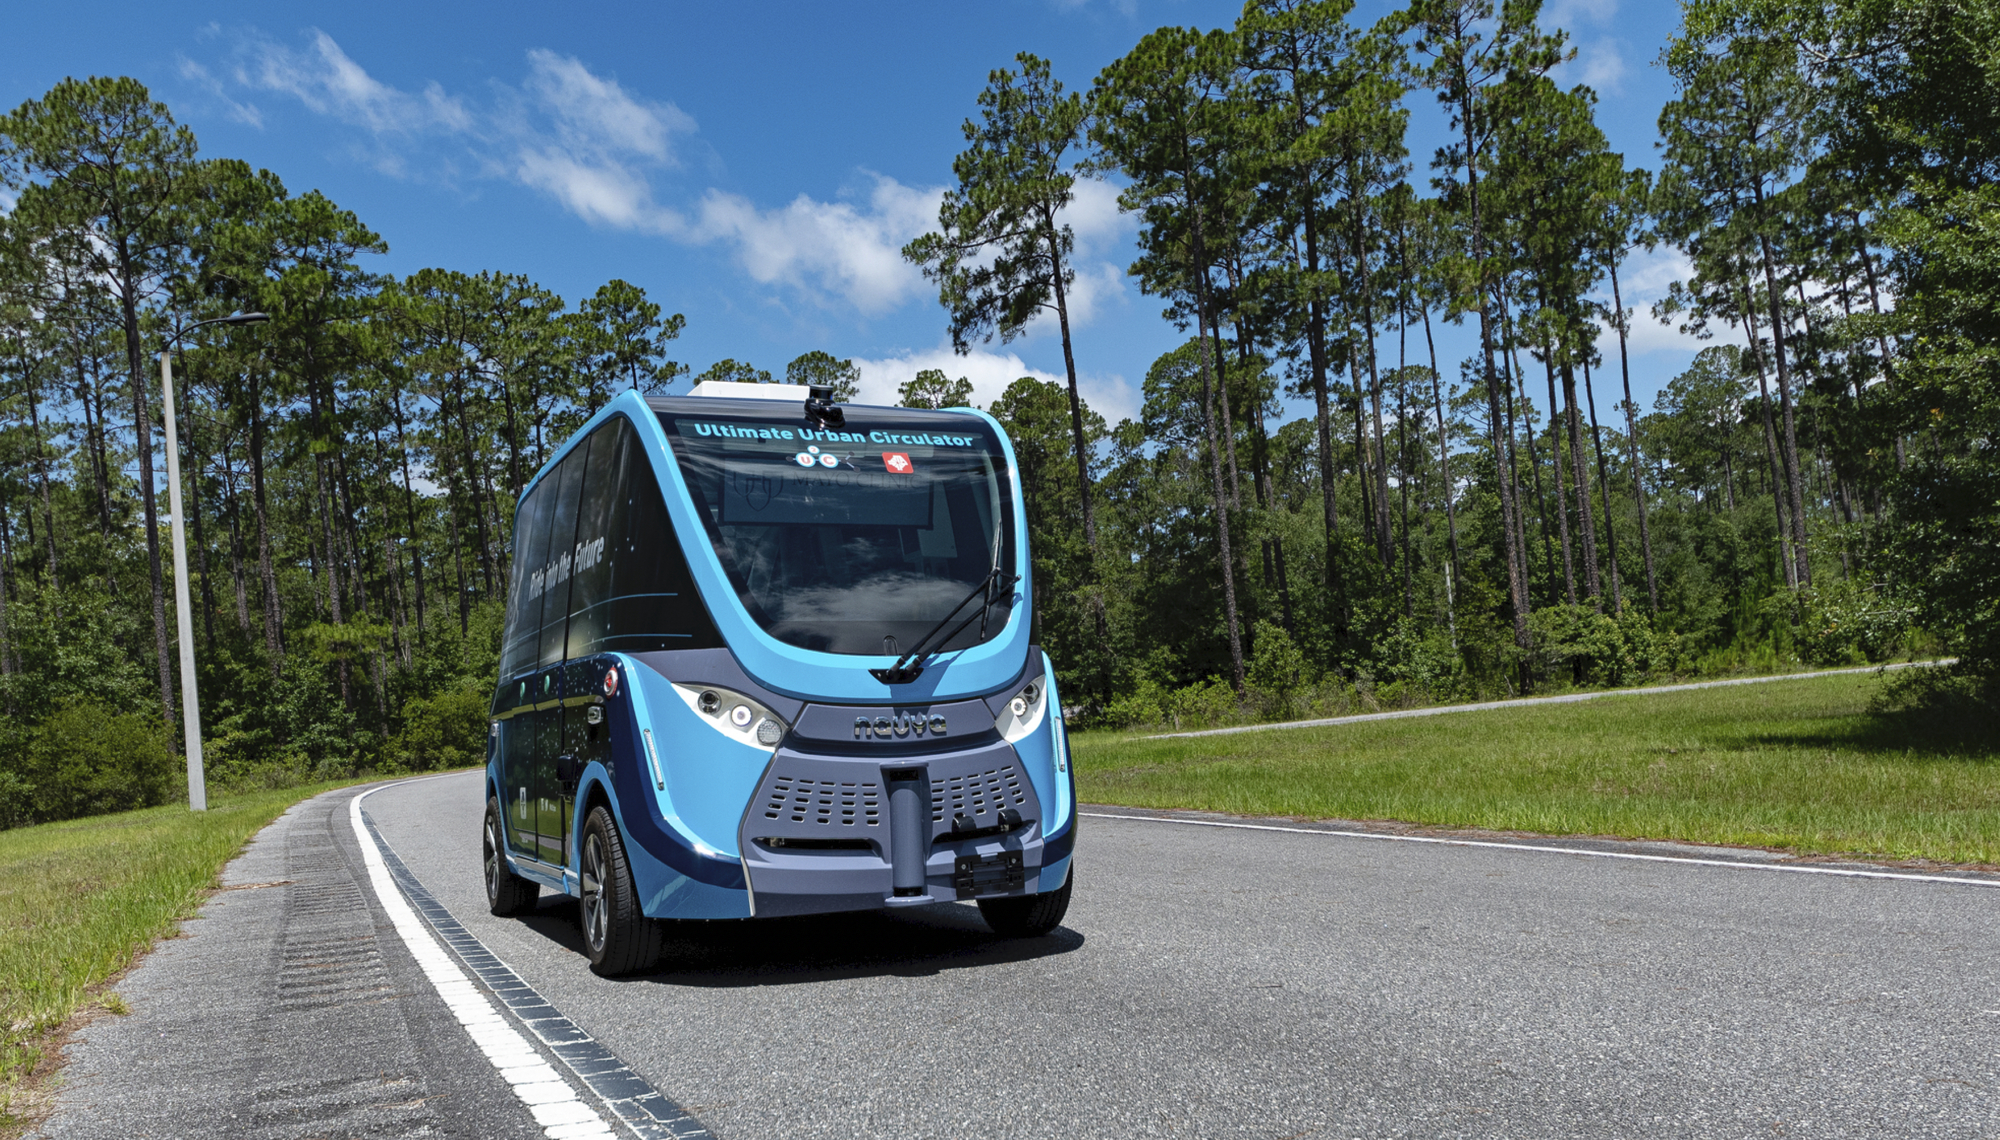 JTA says it will continue to develop and expand the Ultimate Urban Circulator autonomous vehicle program.